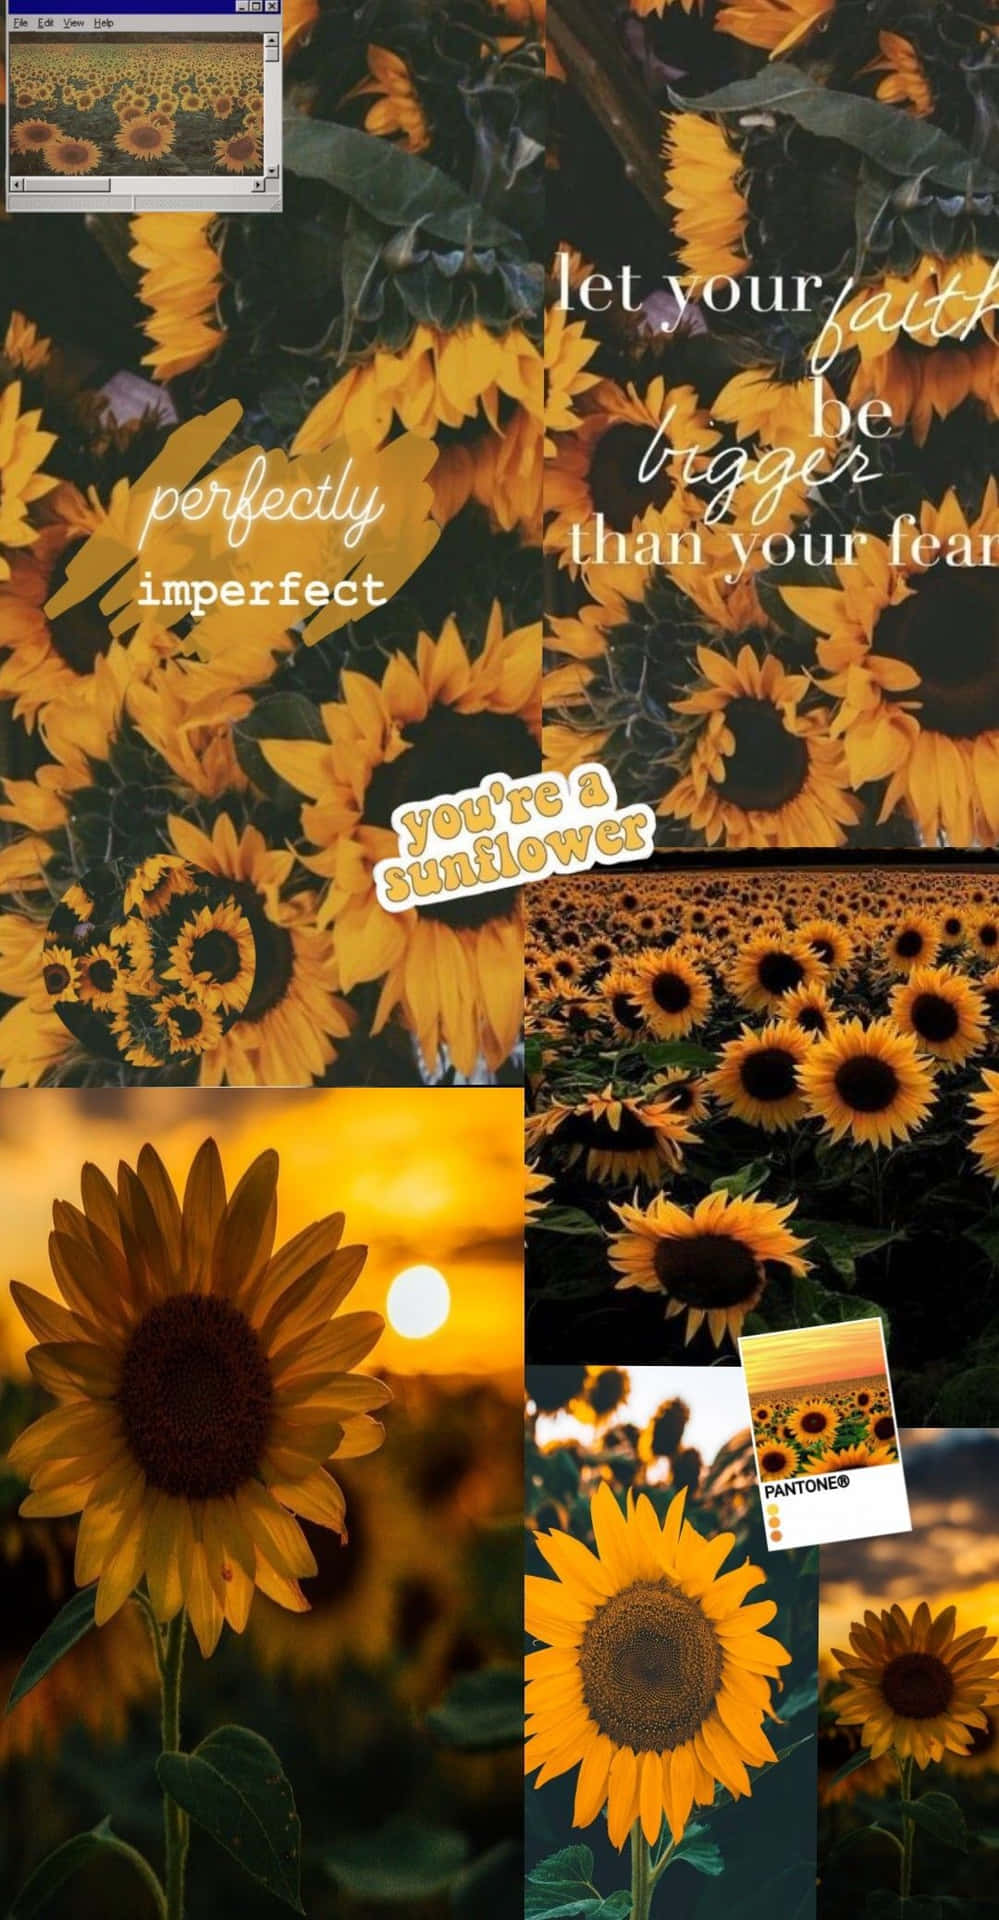 Vibrant Yellow Sunflowers Blooming in a Garden. Wallpaper